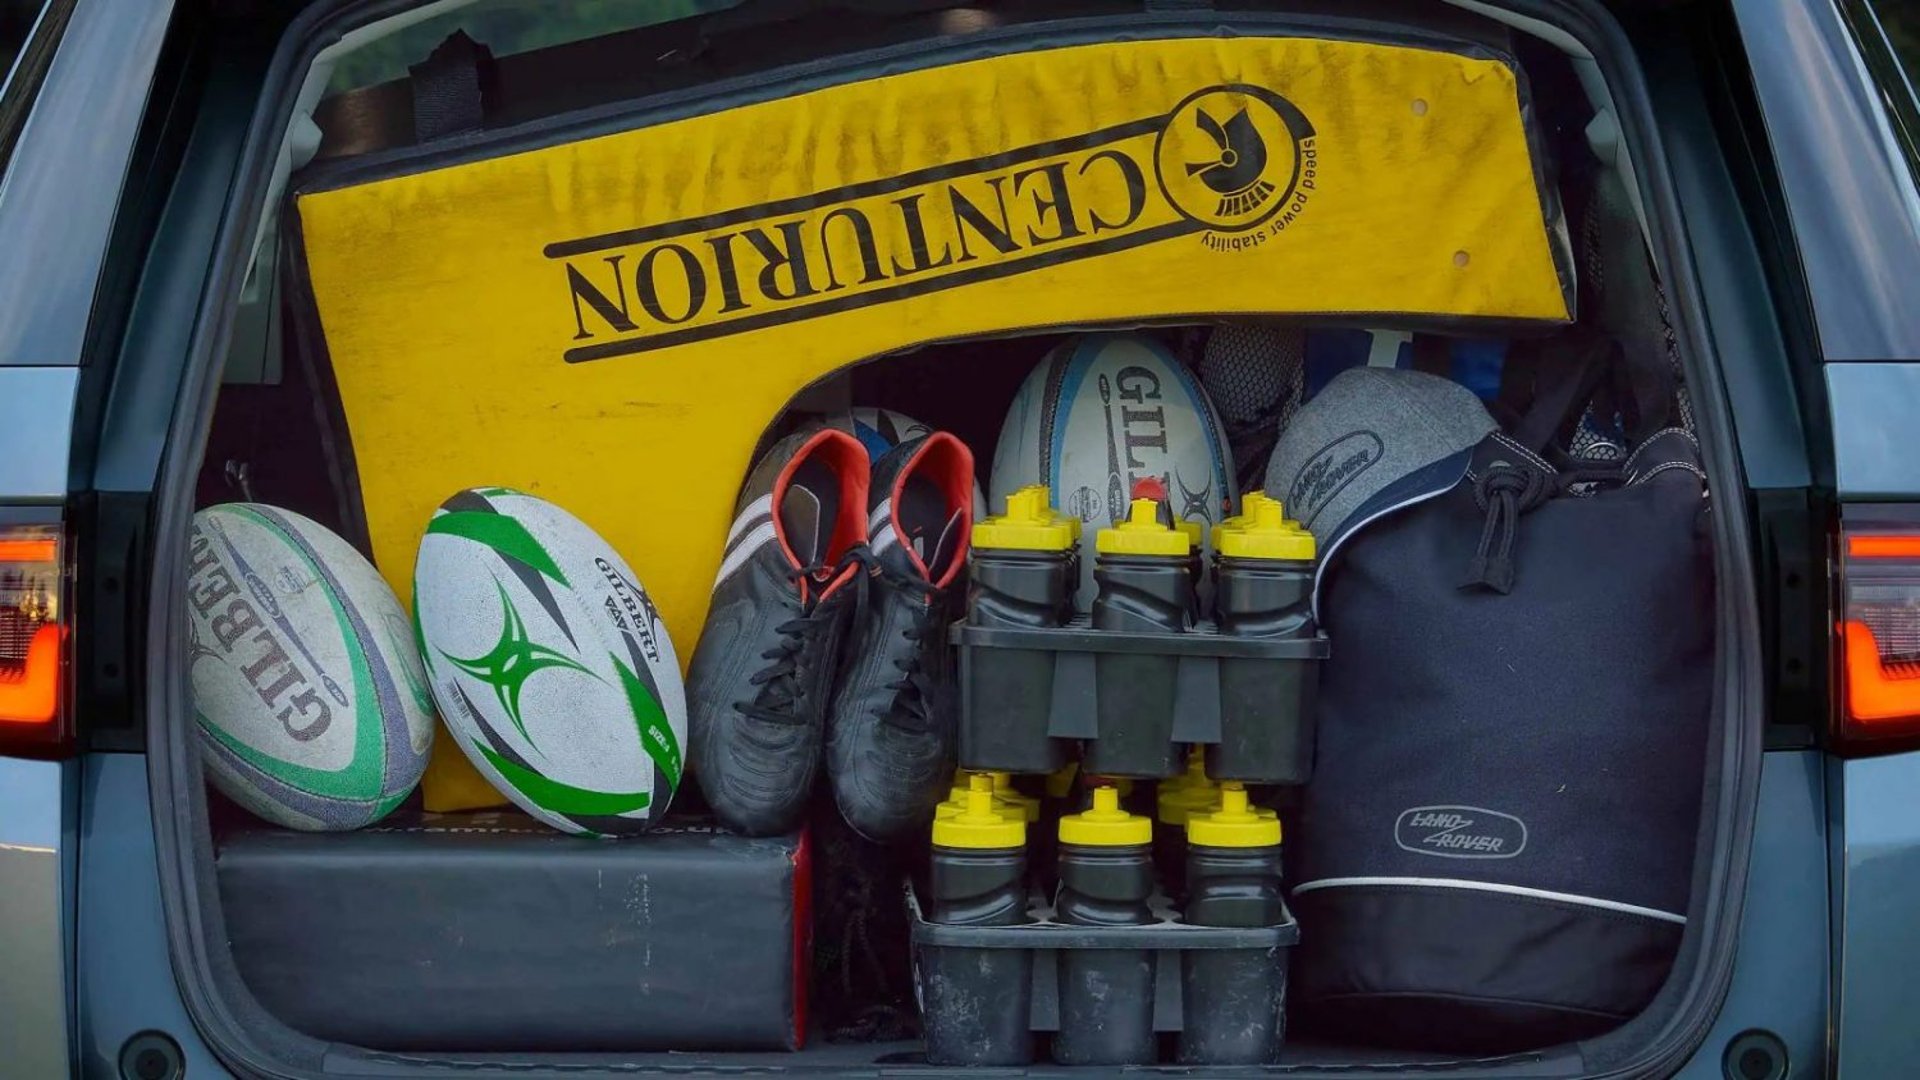 Sports equipment in the boot of the car